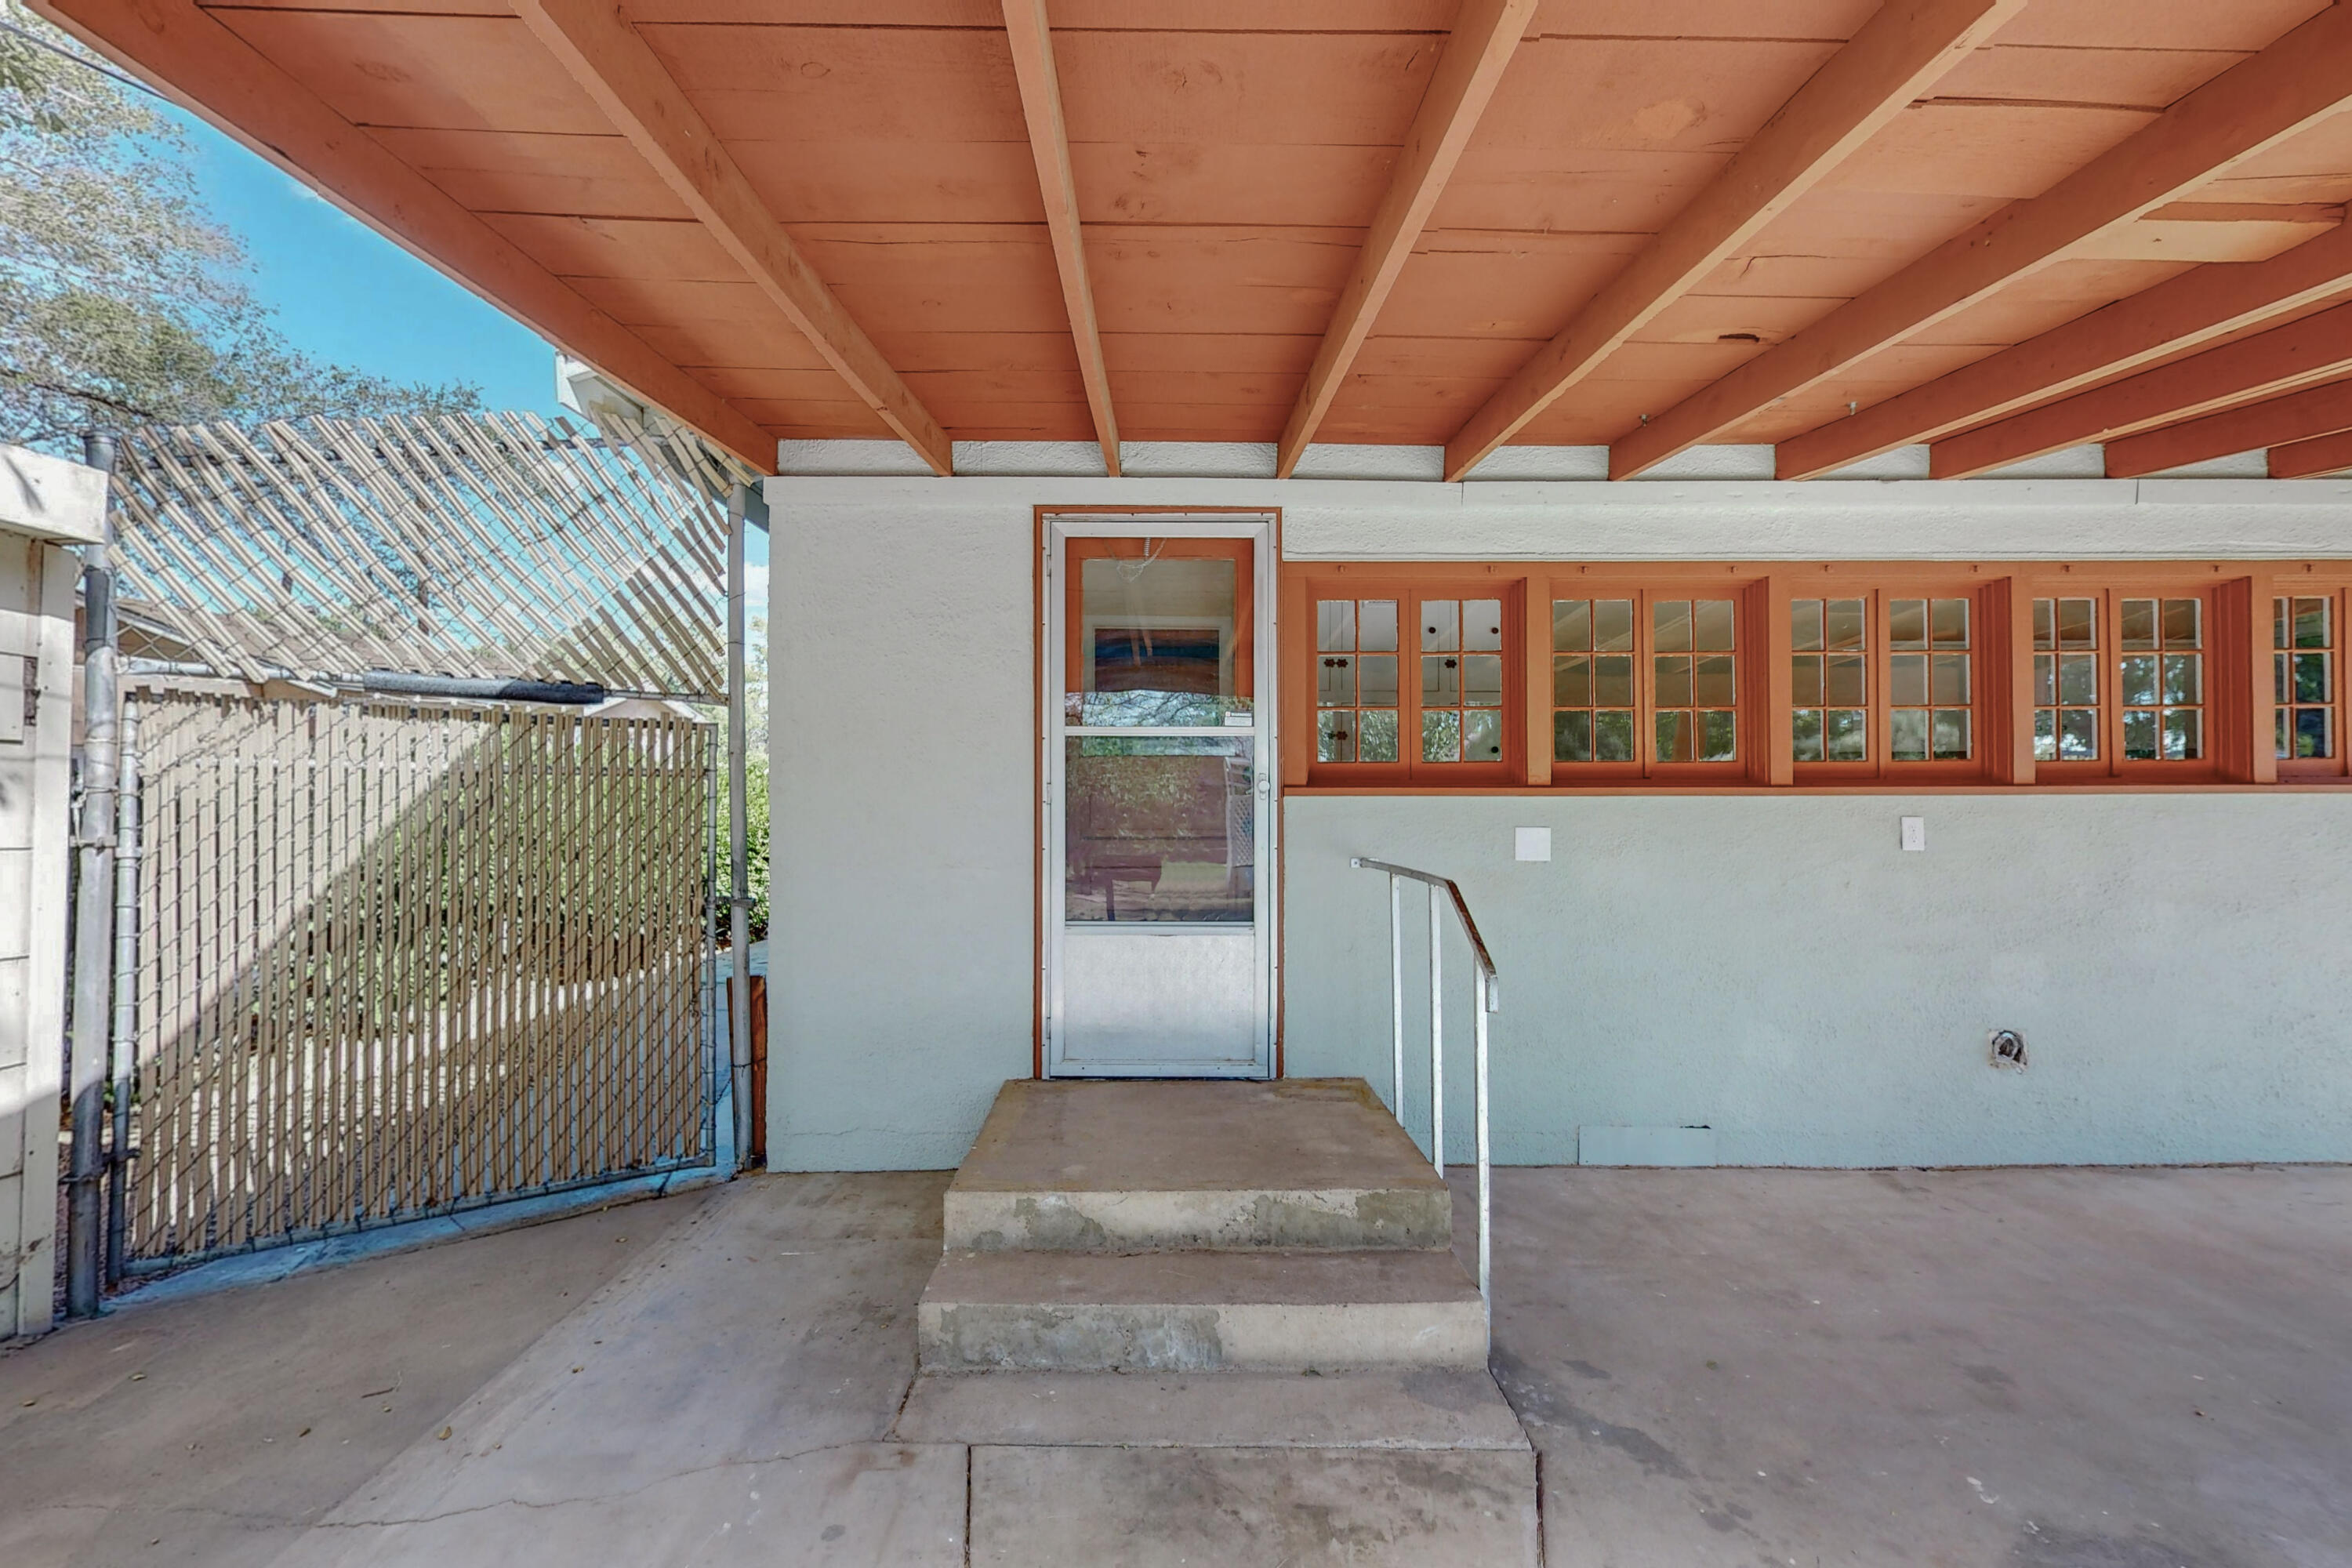 167 Riverside Drive SW, Albuquerque, New Mexico 87105, 3 Bedrooms Bedrooms, ,2 BathroomsBathrooms,Residential,For Sale,167 Riverside Drive SW,1042668